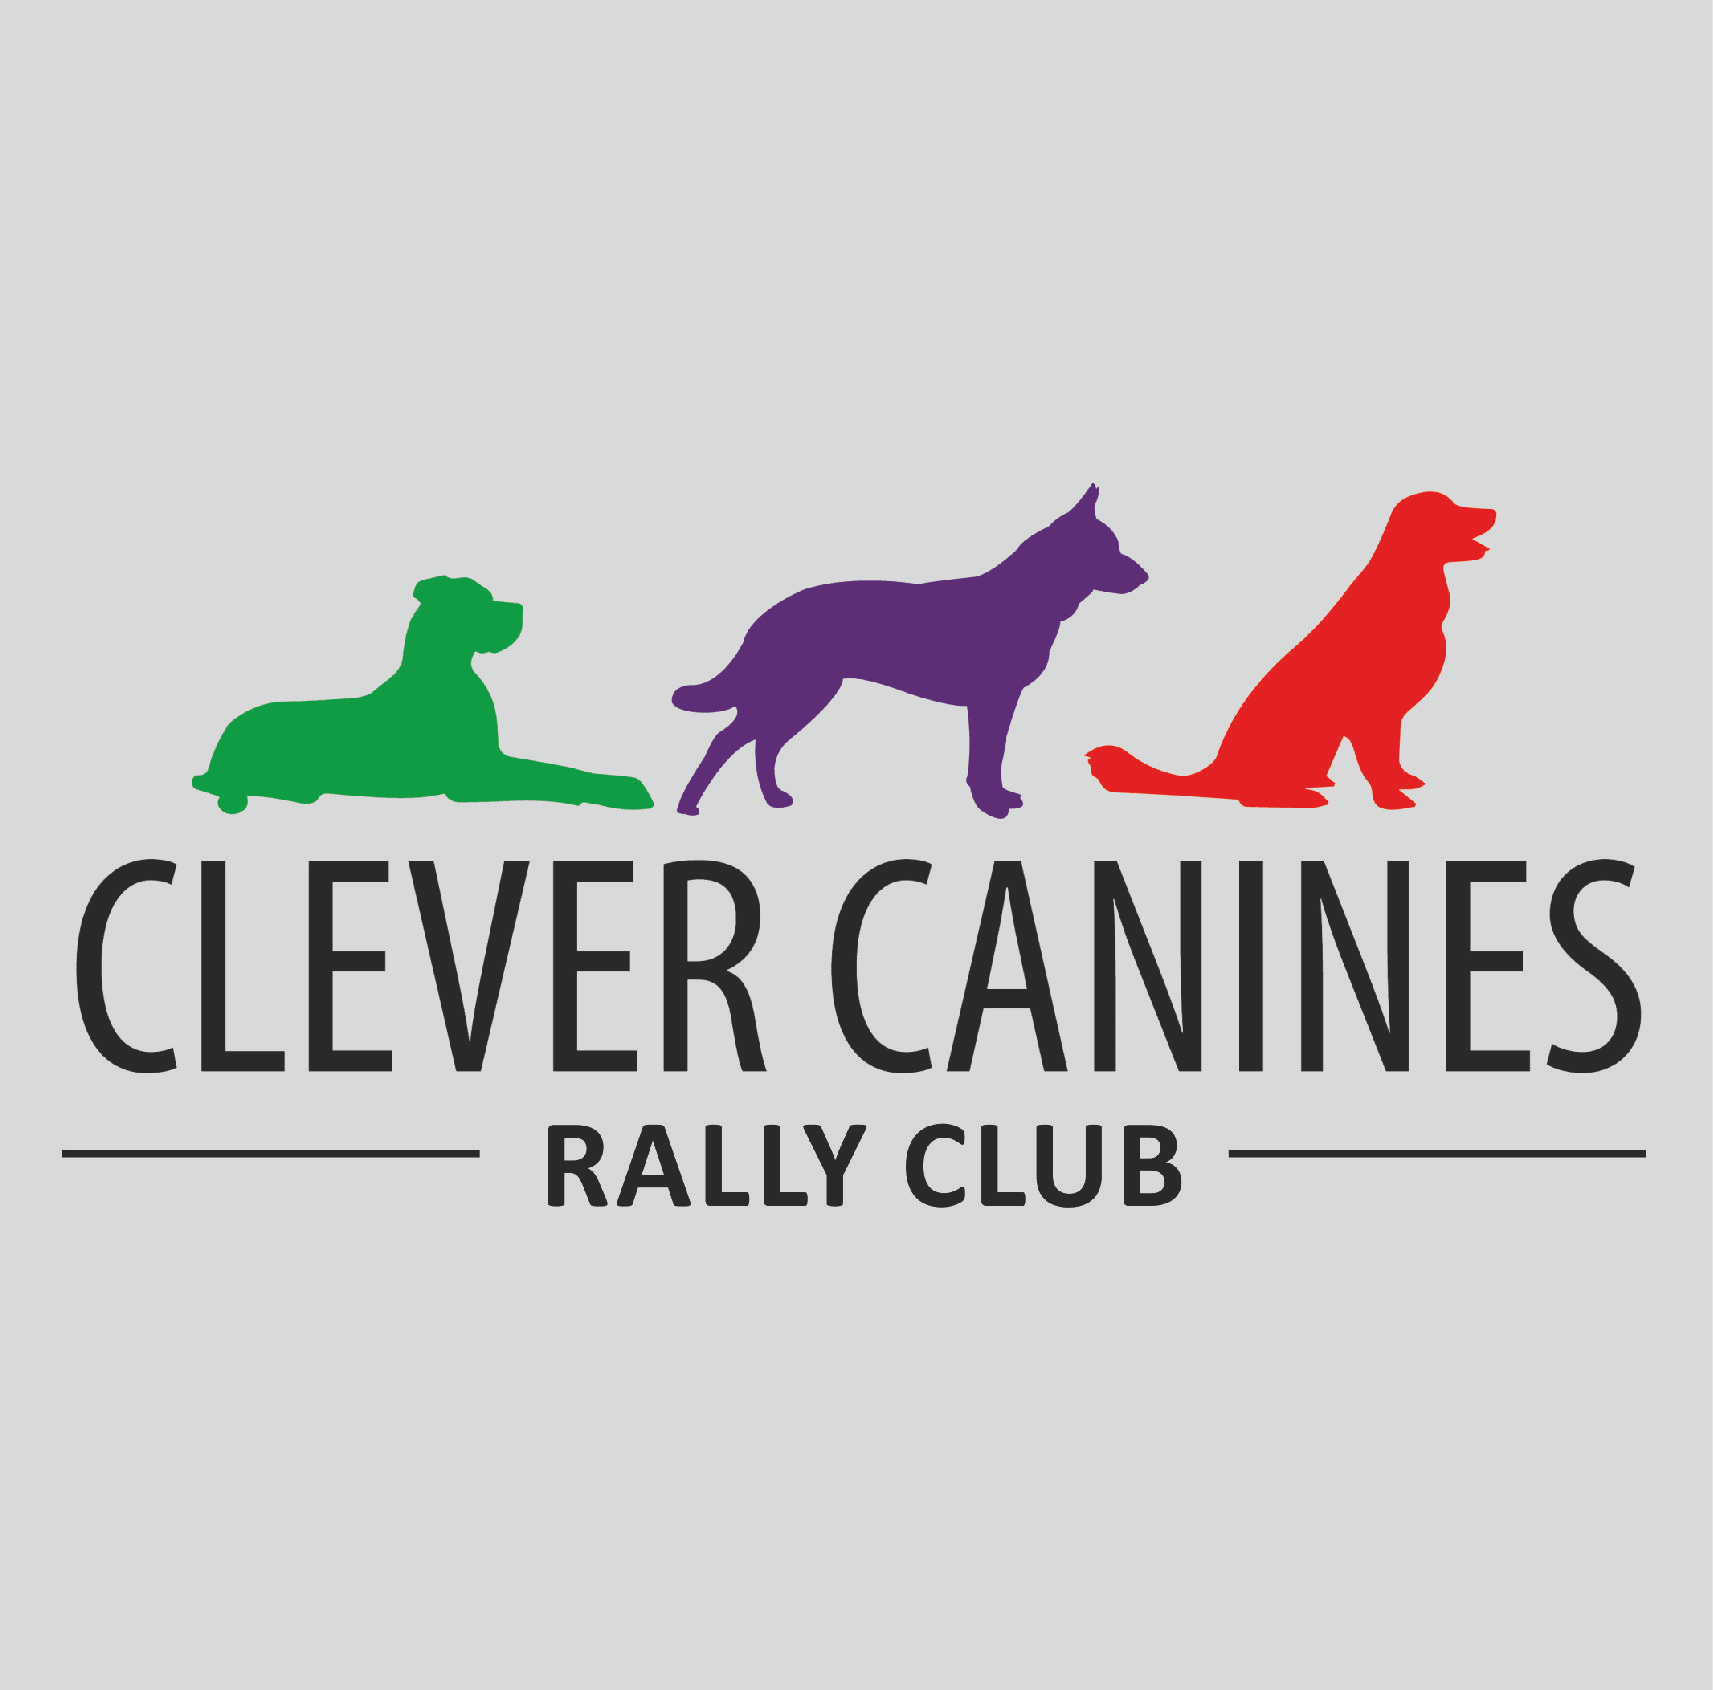 Clever canines logo sigma embroidery